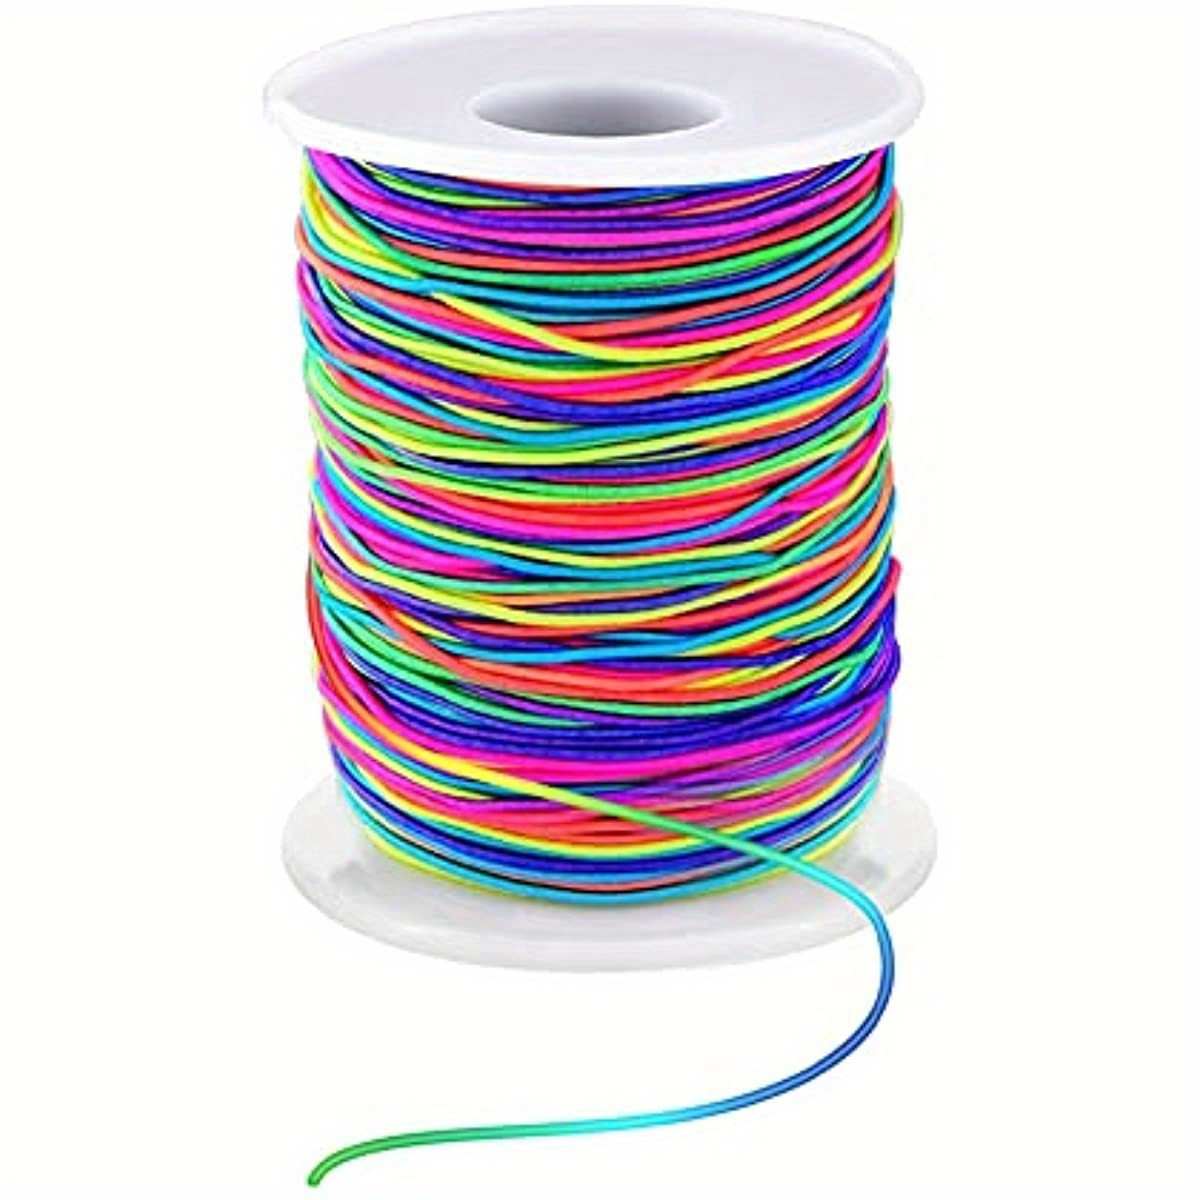 

1roll 45m/147ft Rainbow Color Fabric Thread For Jewelry Making